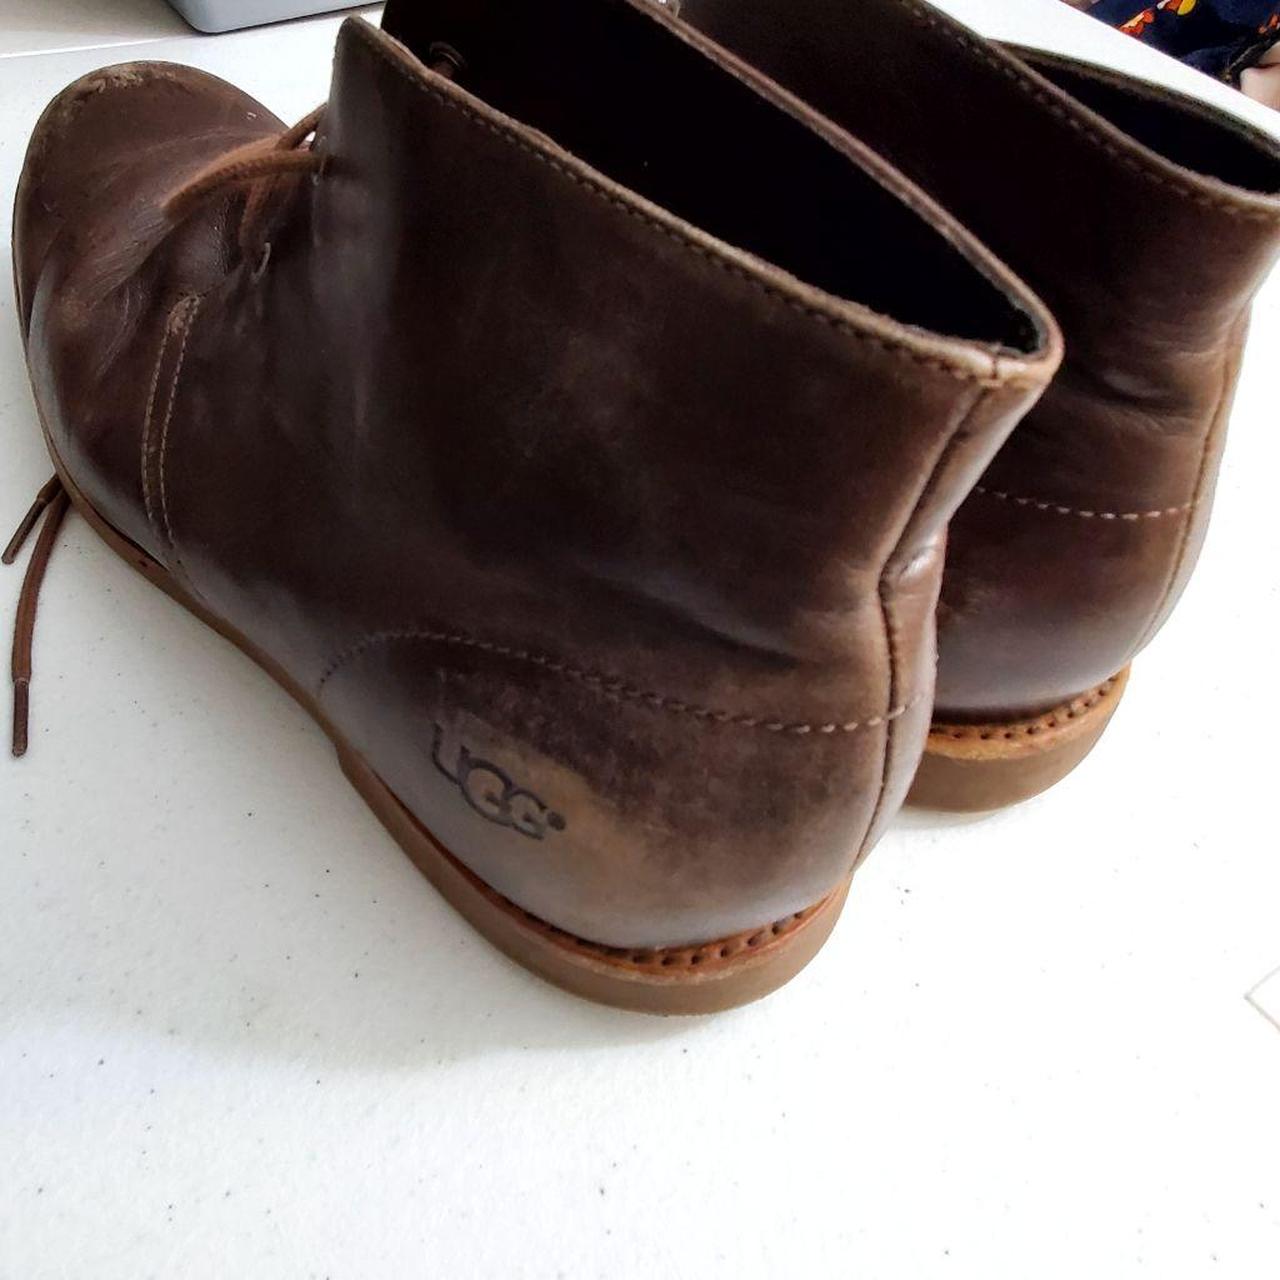 Product Image 3 - Ugg Leather Ankle Boots size